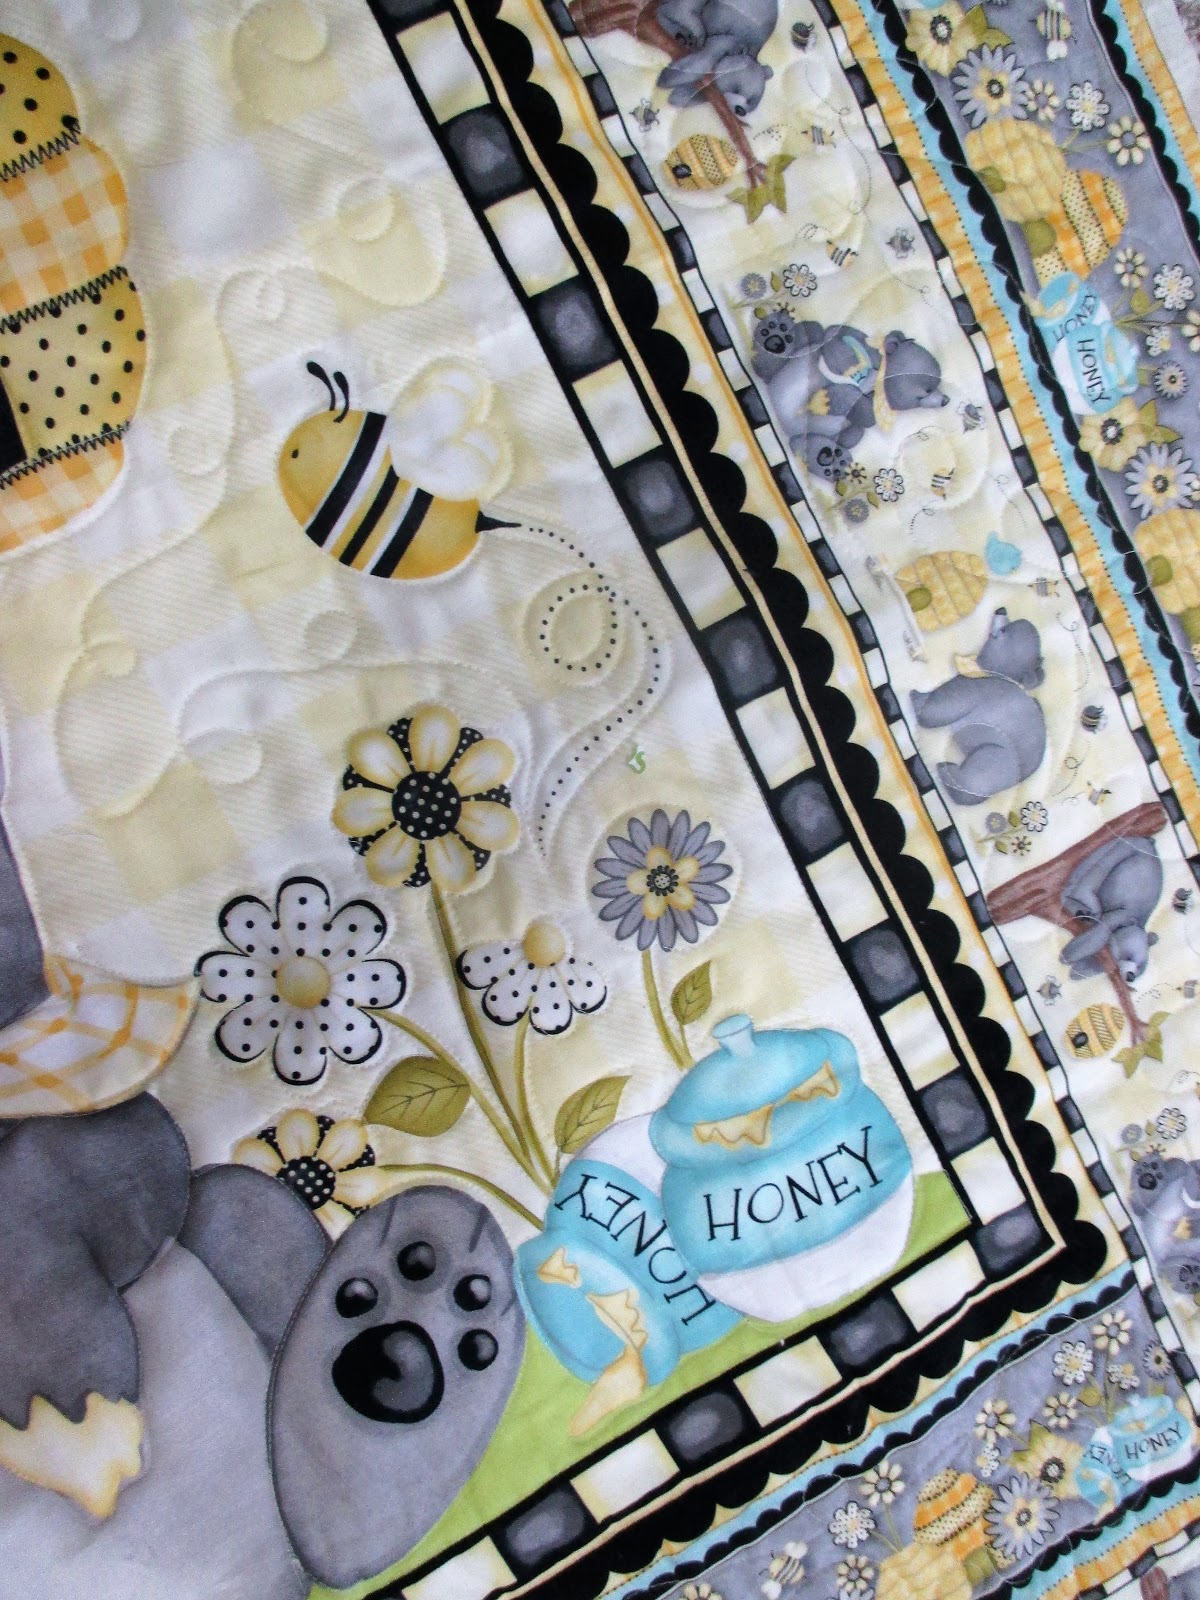 Down To Sew: Linda's Baby quilt panels